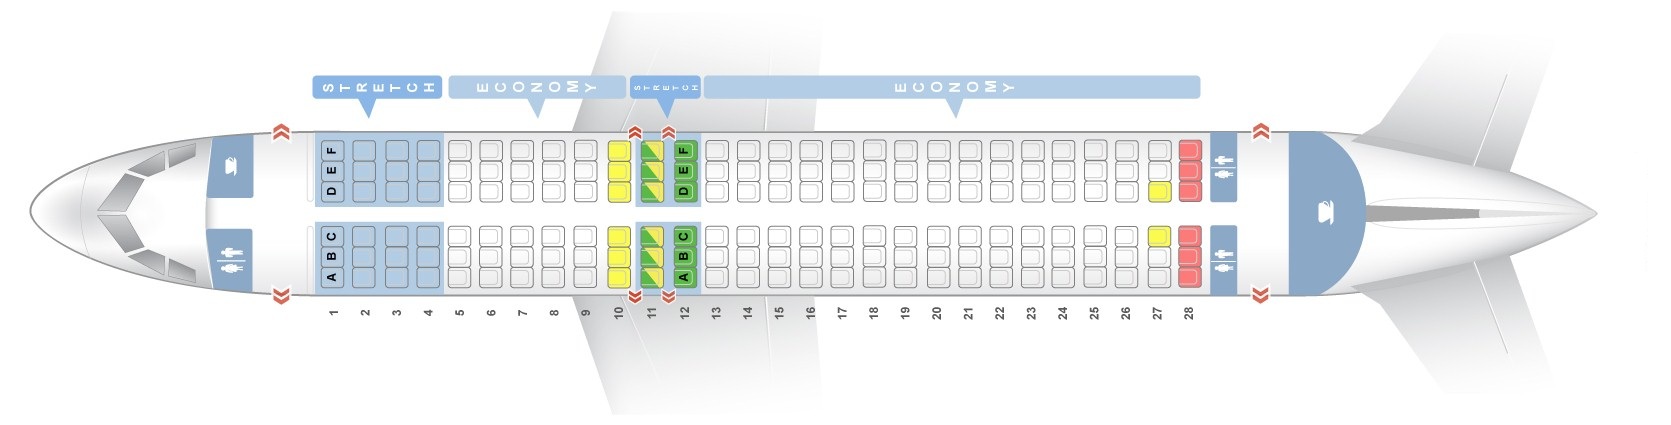 Gallery Of Seat Map Airbus A320neo Frontier Airlines Best Seats In The